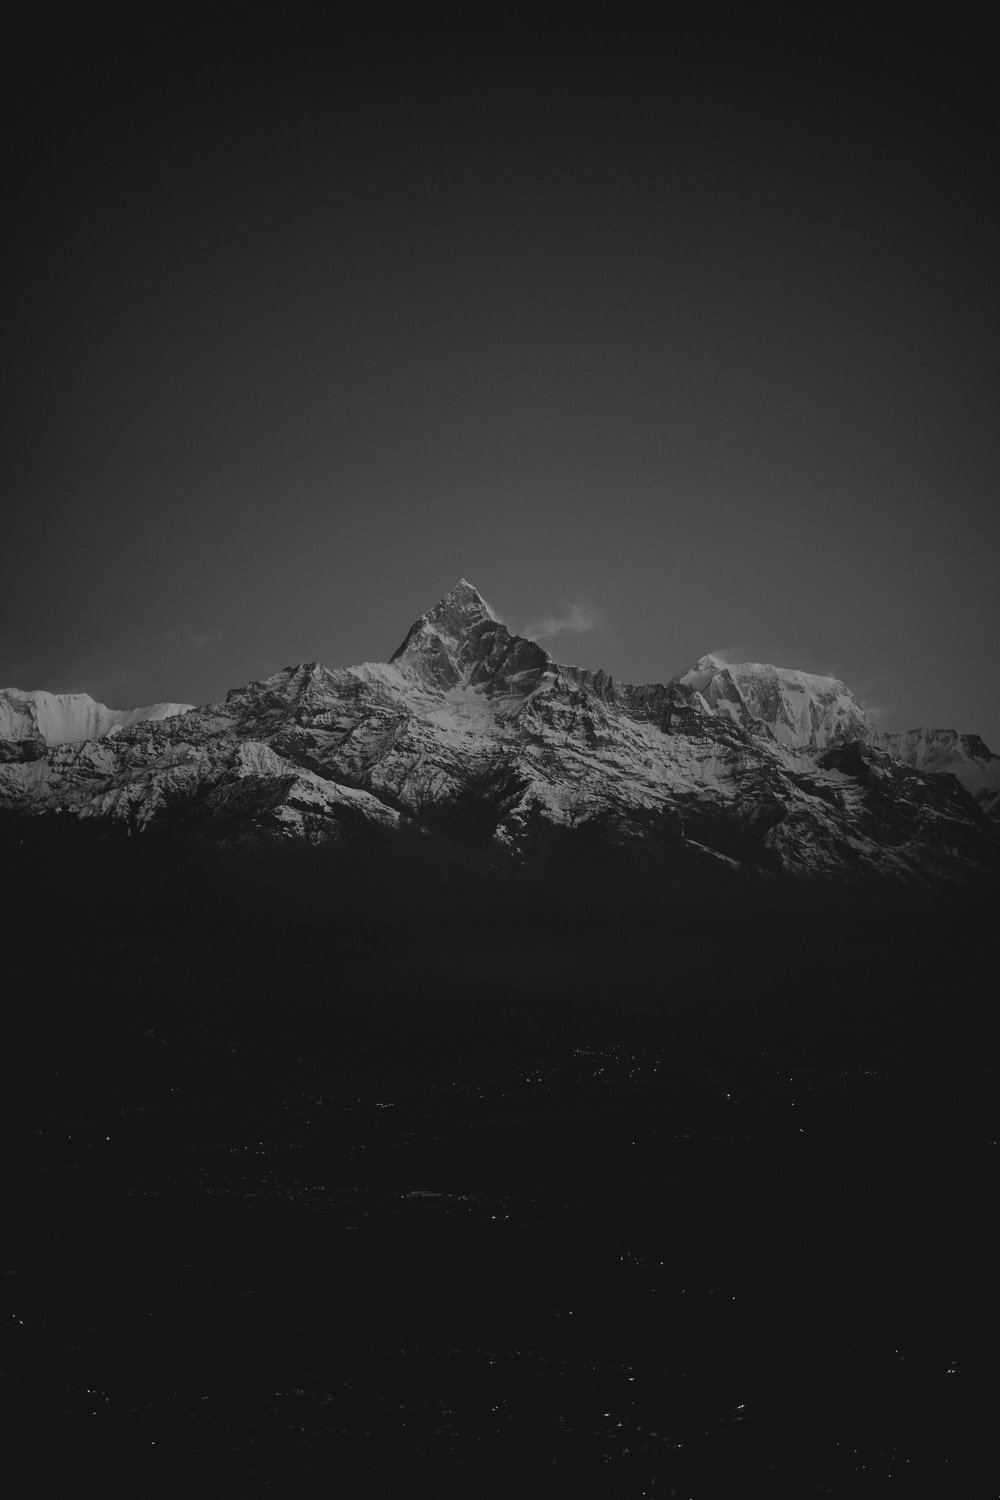 Mount Everest Picture. Download Free Image